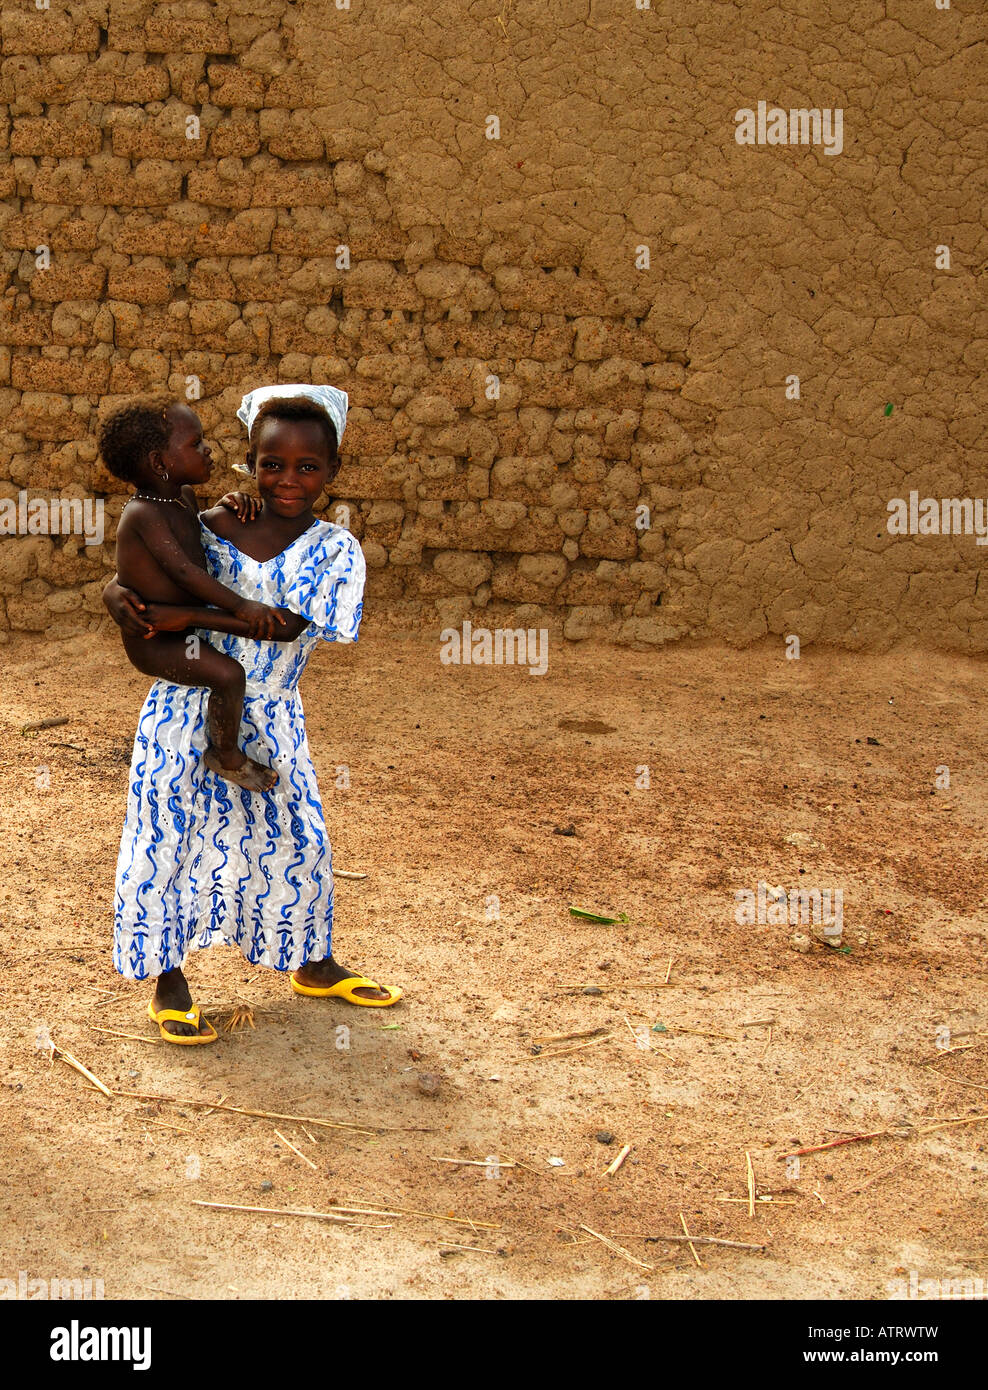 Young African girl carries her sister on the arm village scene Burkina Faso Stock Photo